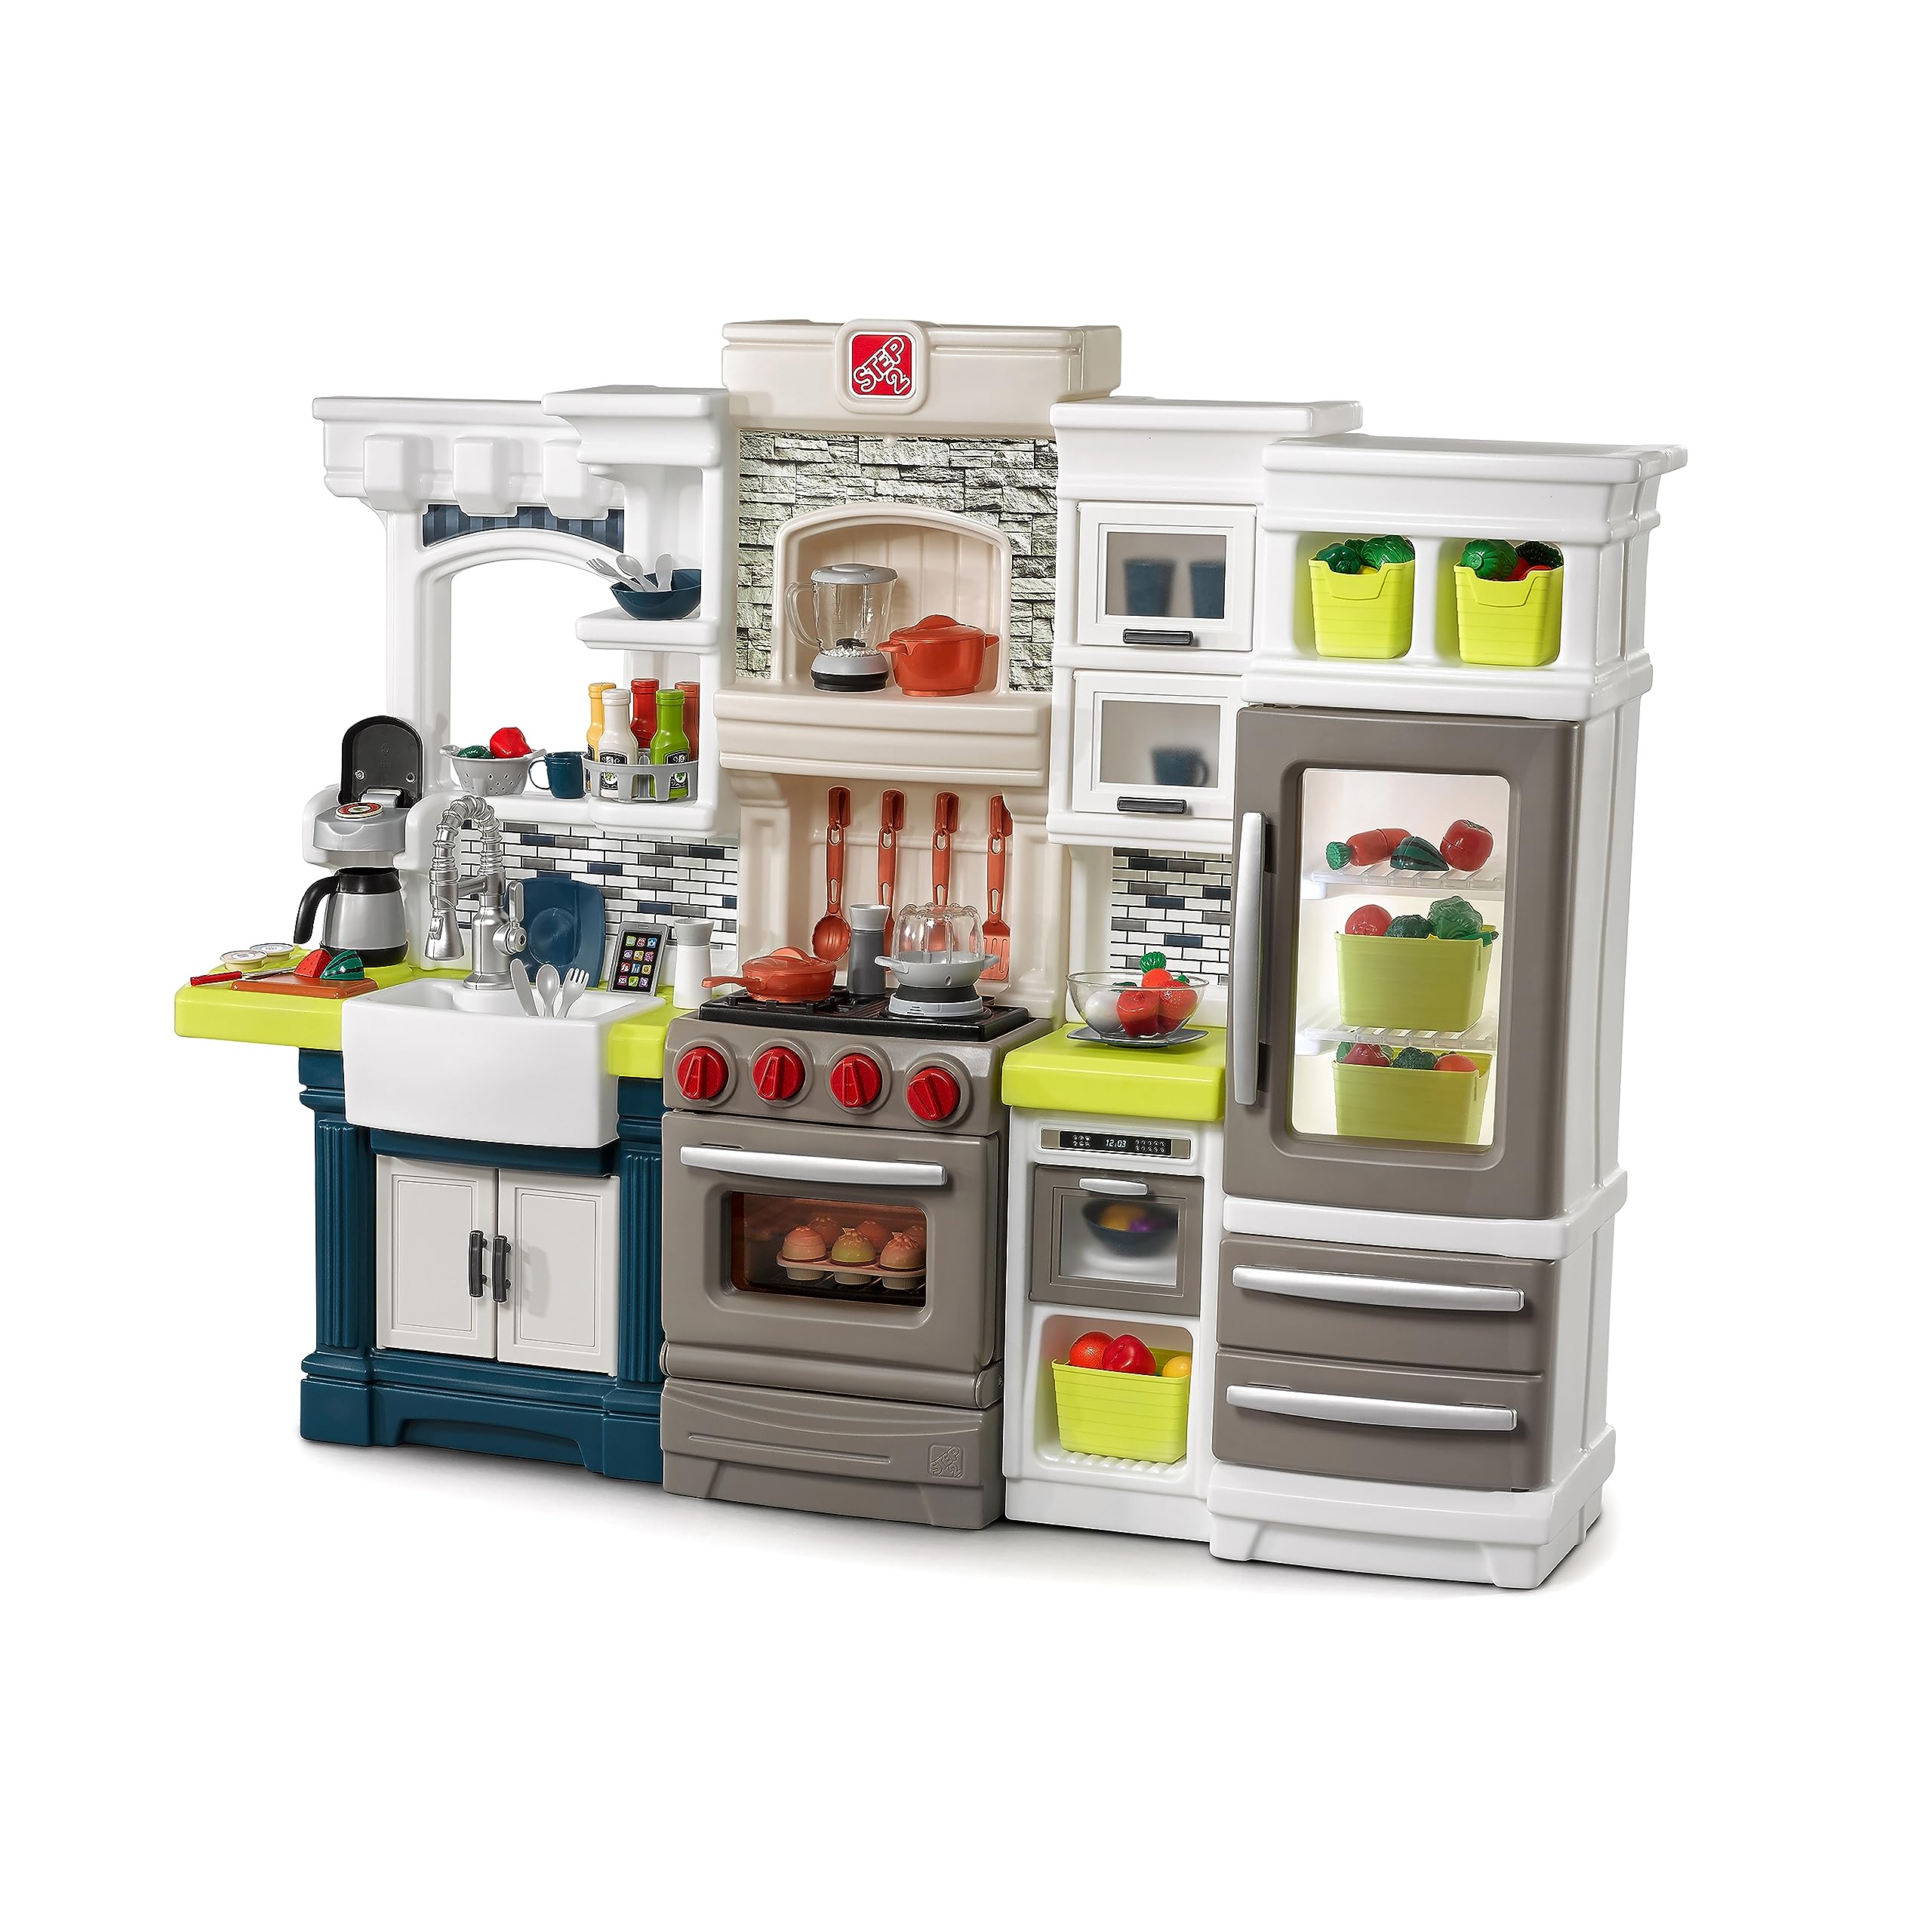 Step 2 Step2 Elegant Edge Kitchen Set for Kids - Includes 70+ Toy Kitchen Accessories, Interactive Features for Realistic Pretend Play 